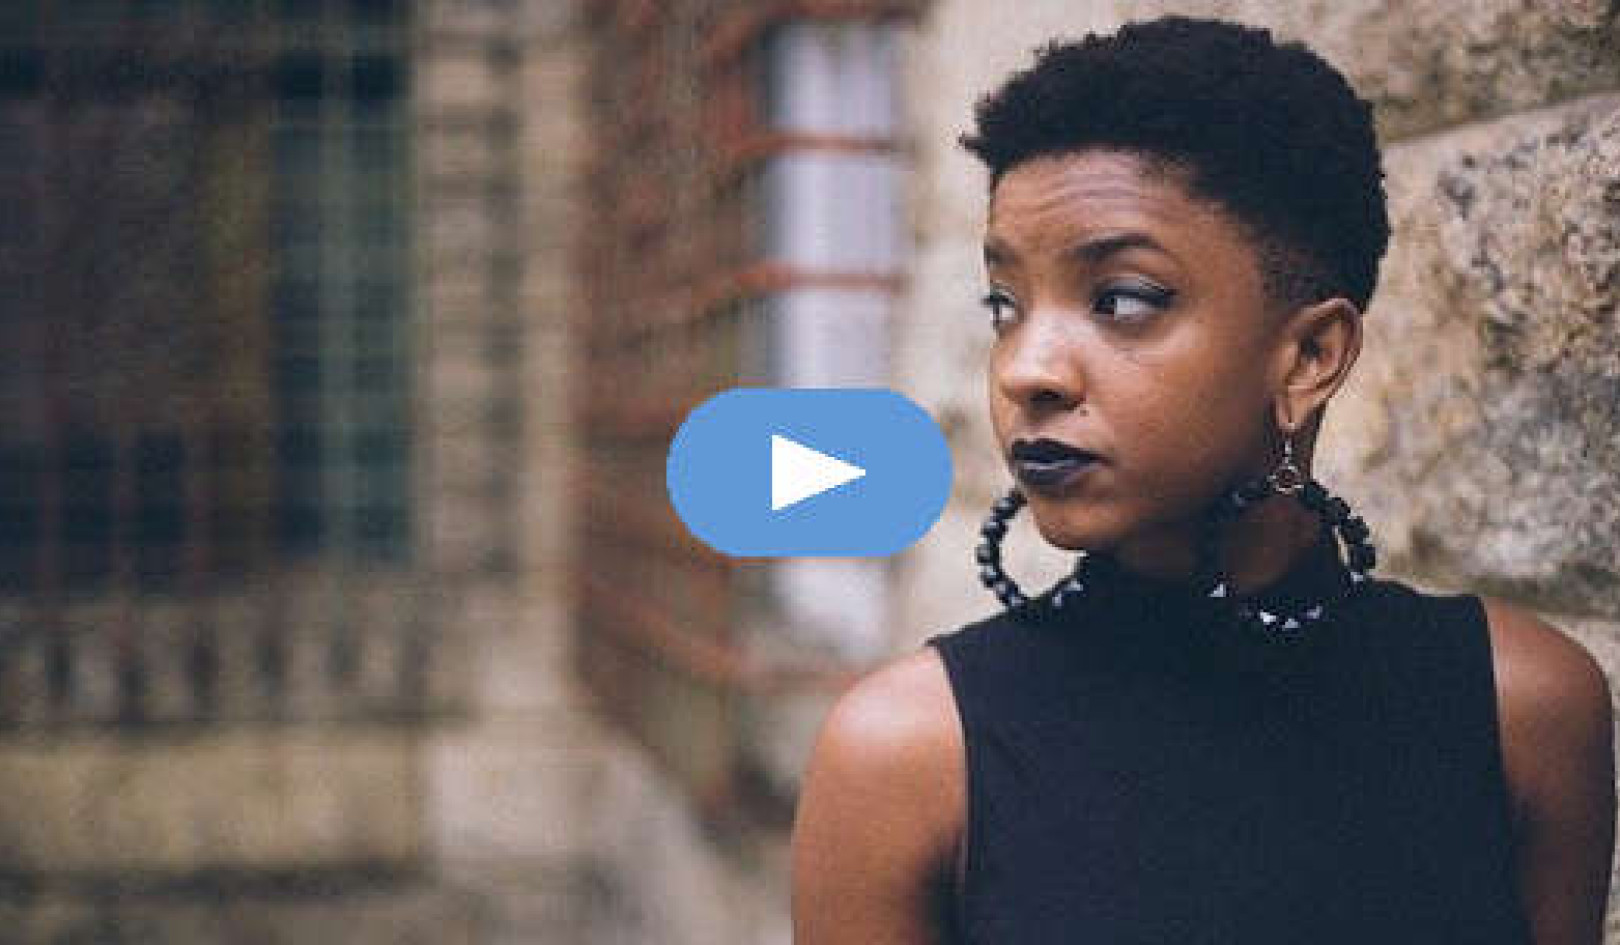 Why A Black Woman With Harvard Credentials Is Still a Black Woman (Video)